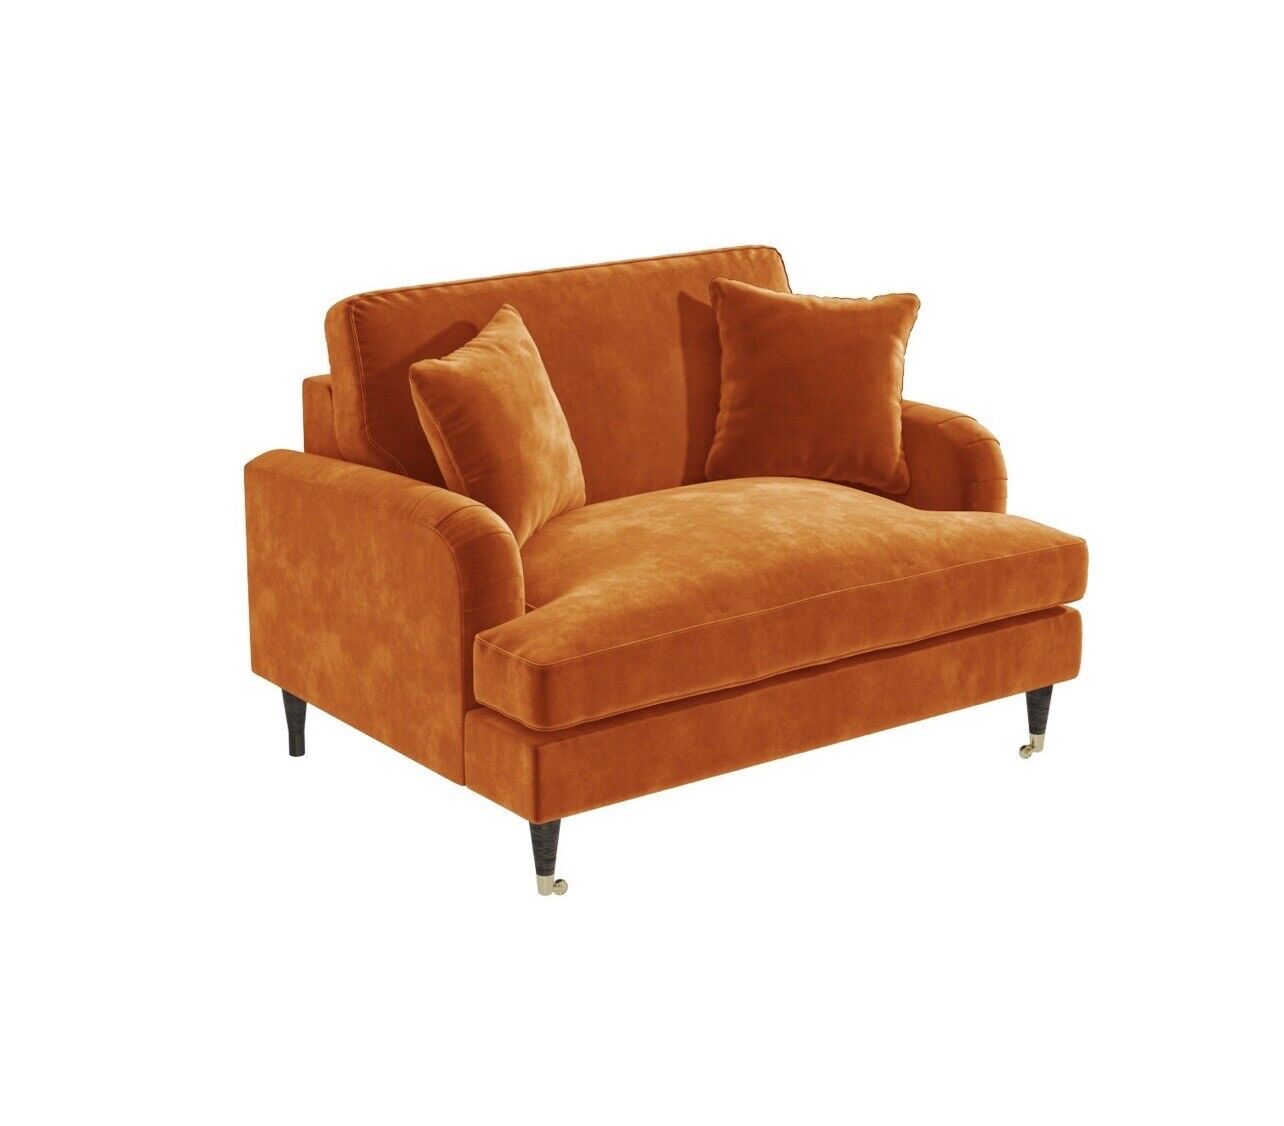 Loveseat 2 Seater Velvet Sofa Couch with Cushions